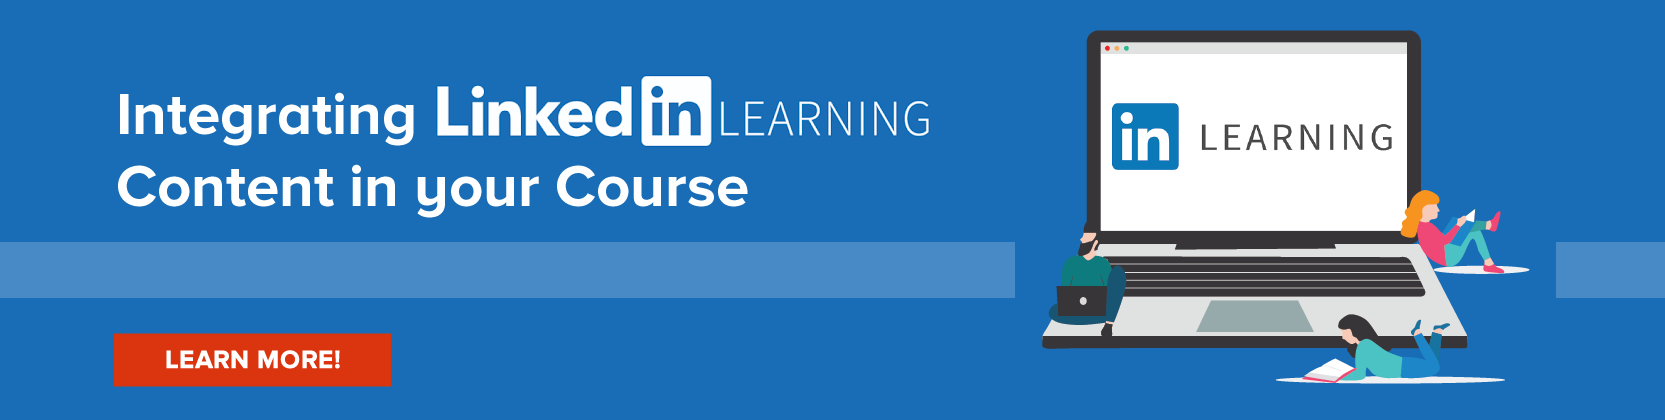 Integrating LinkedIn Learning in your course Page Banner 